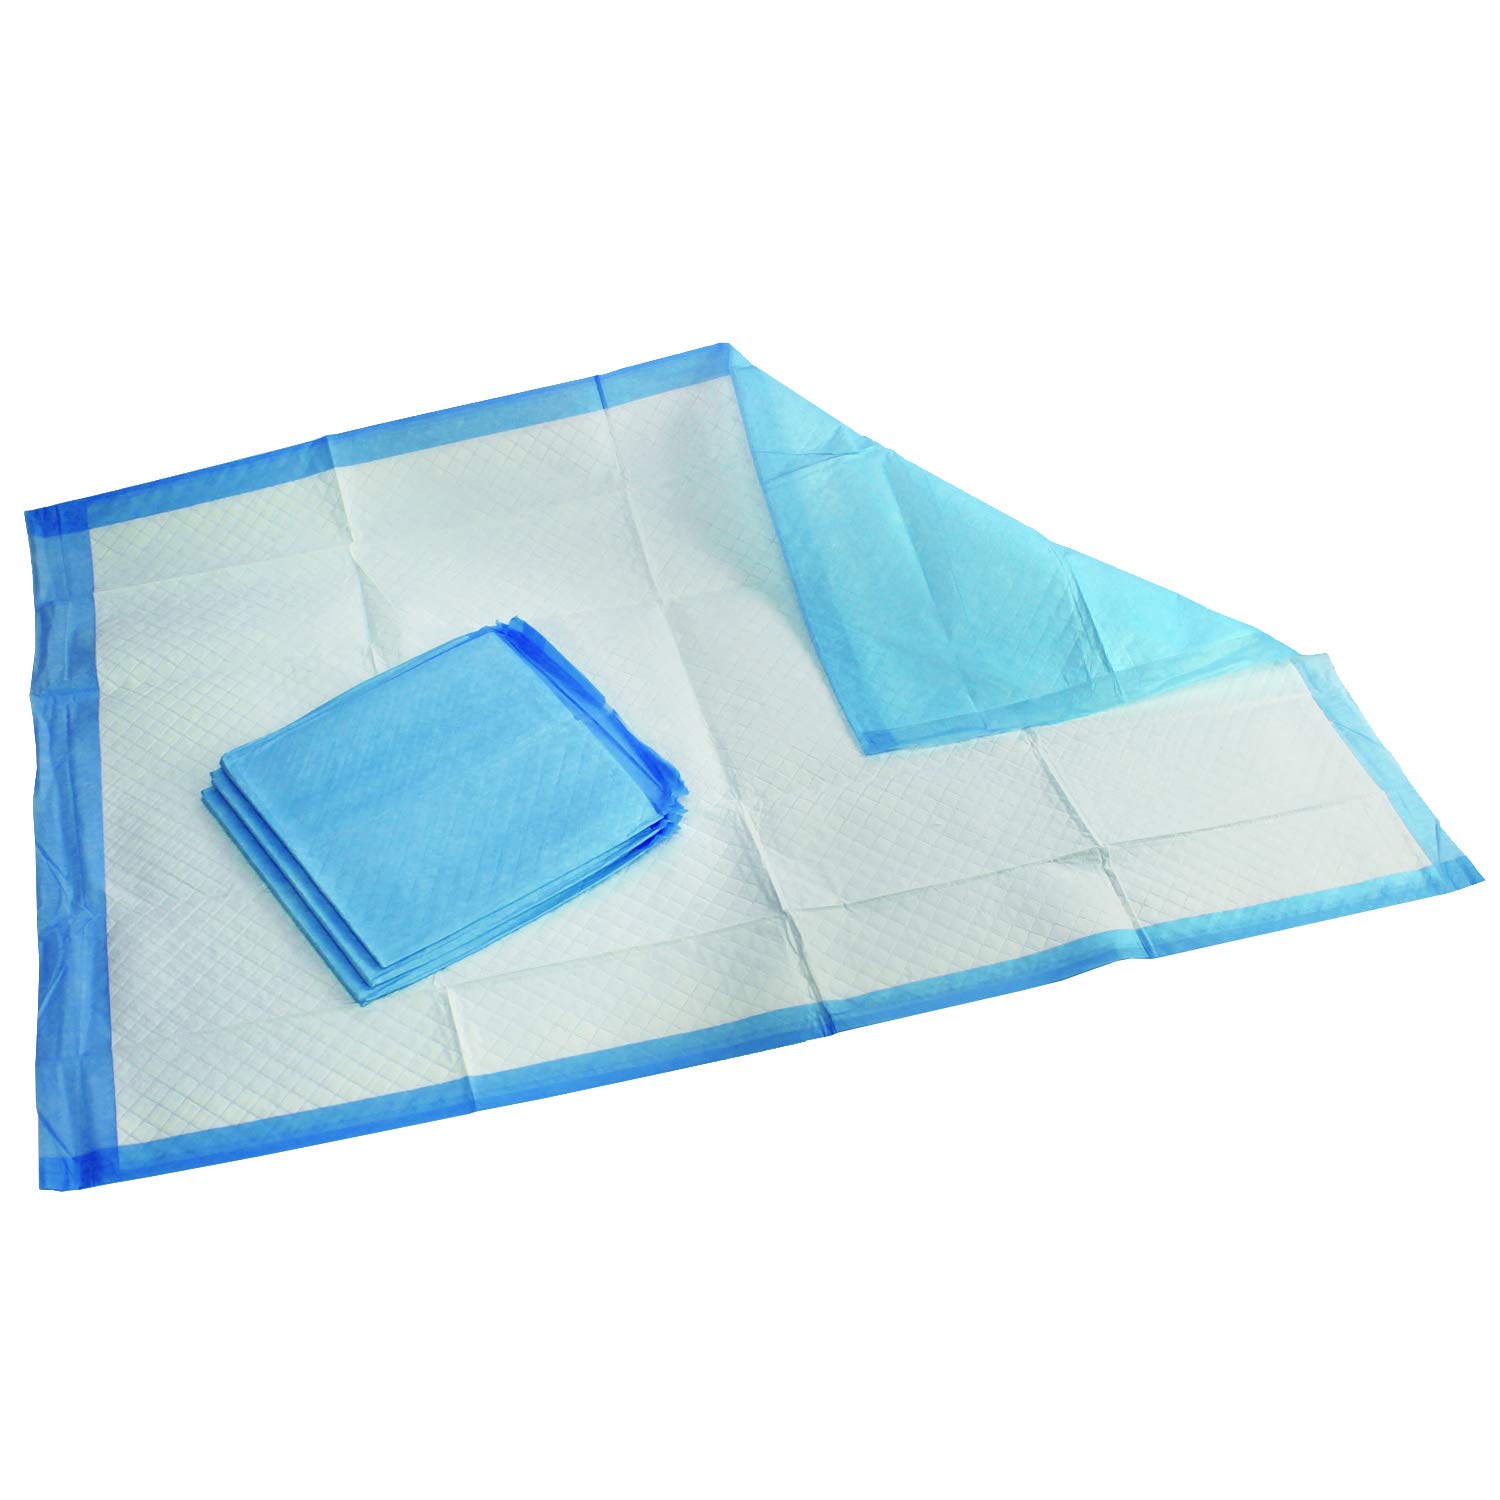 Adult Bed Pads, Pee Pads for Adults